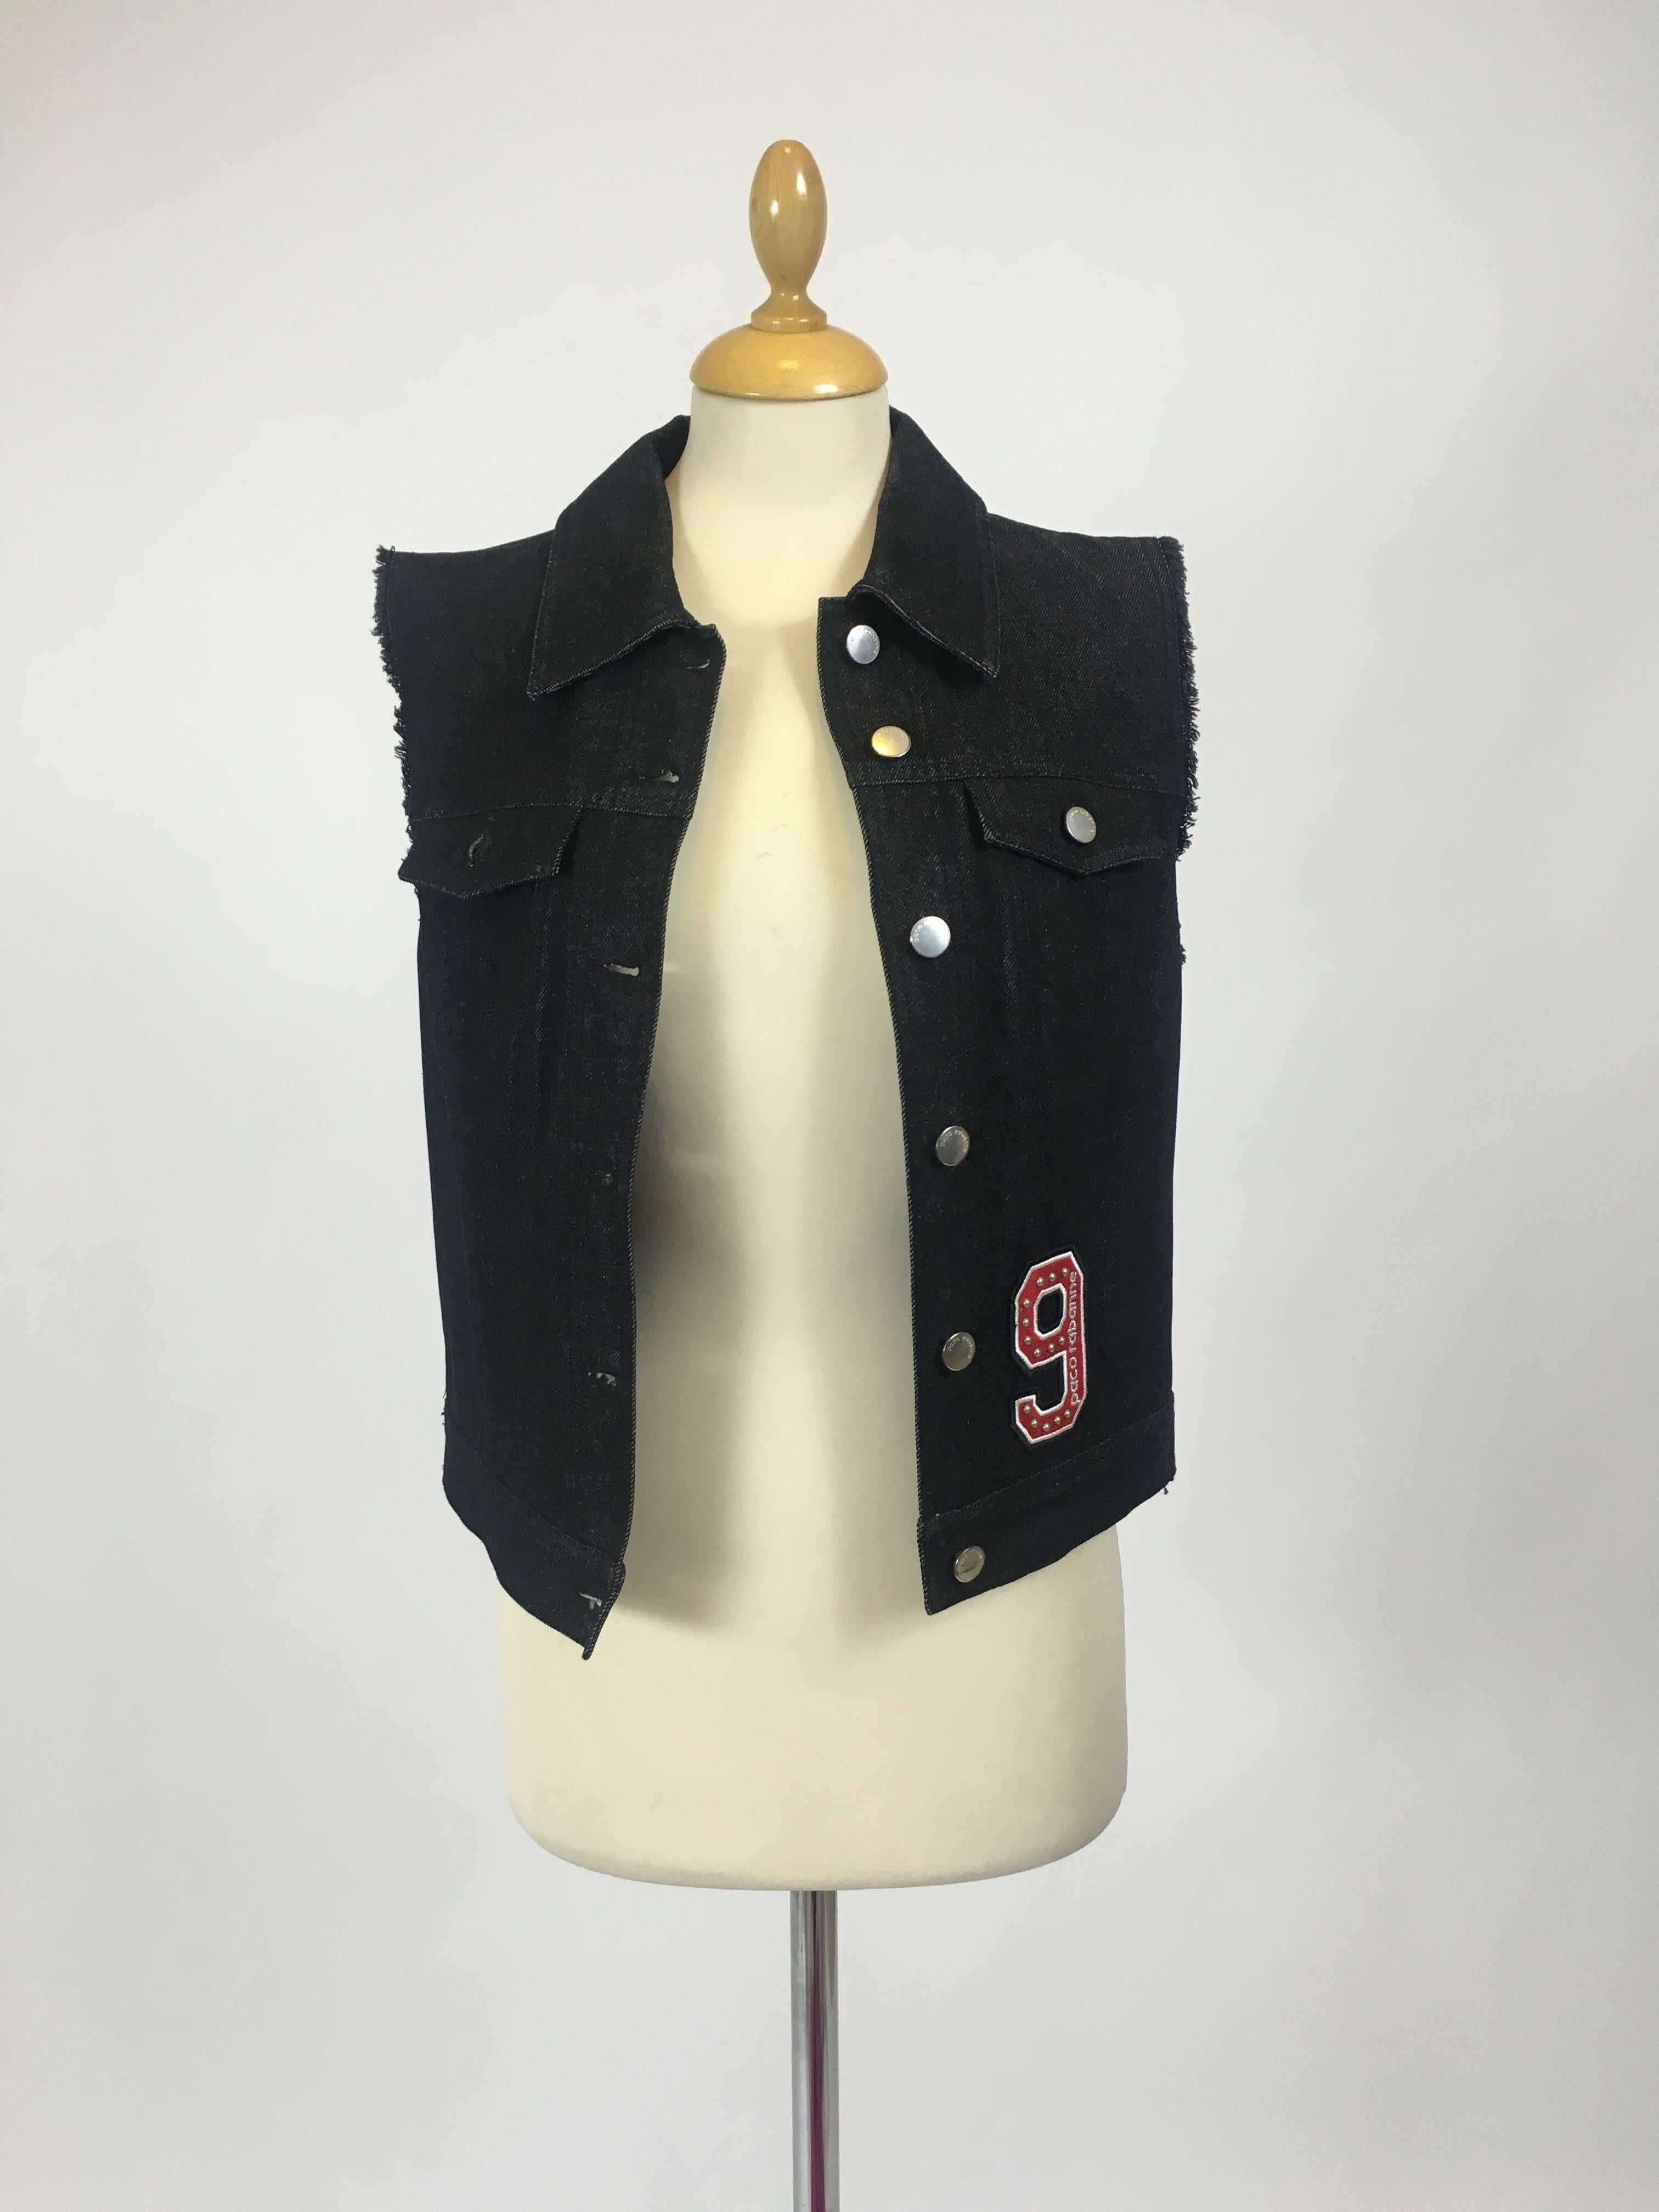 PACO RABANNE Denim Black Vest Jacket w/Silver Mesh Insert In New Condition For Sale In Milan, Italy